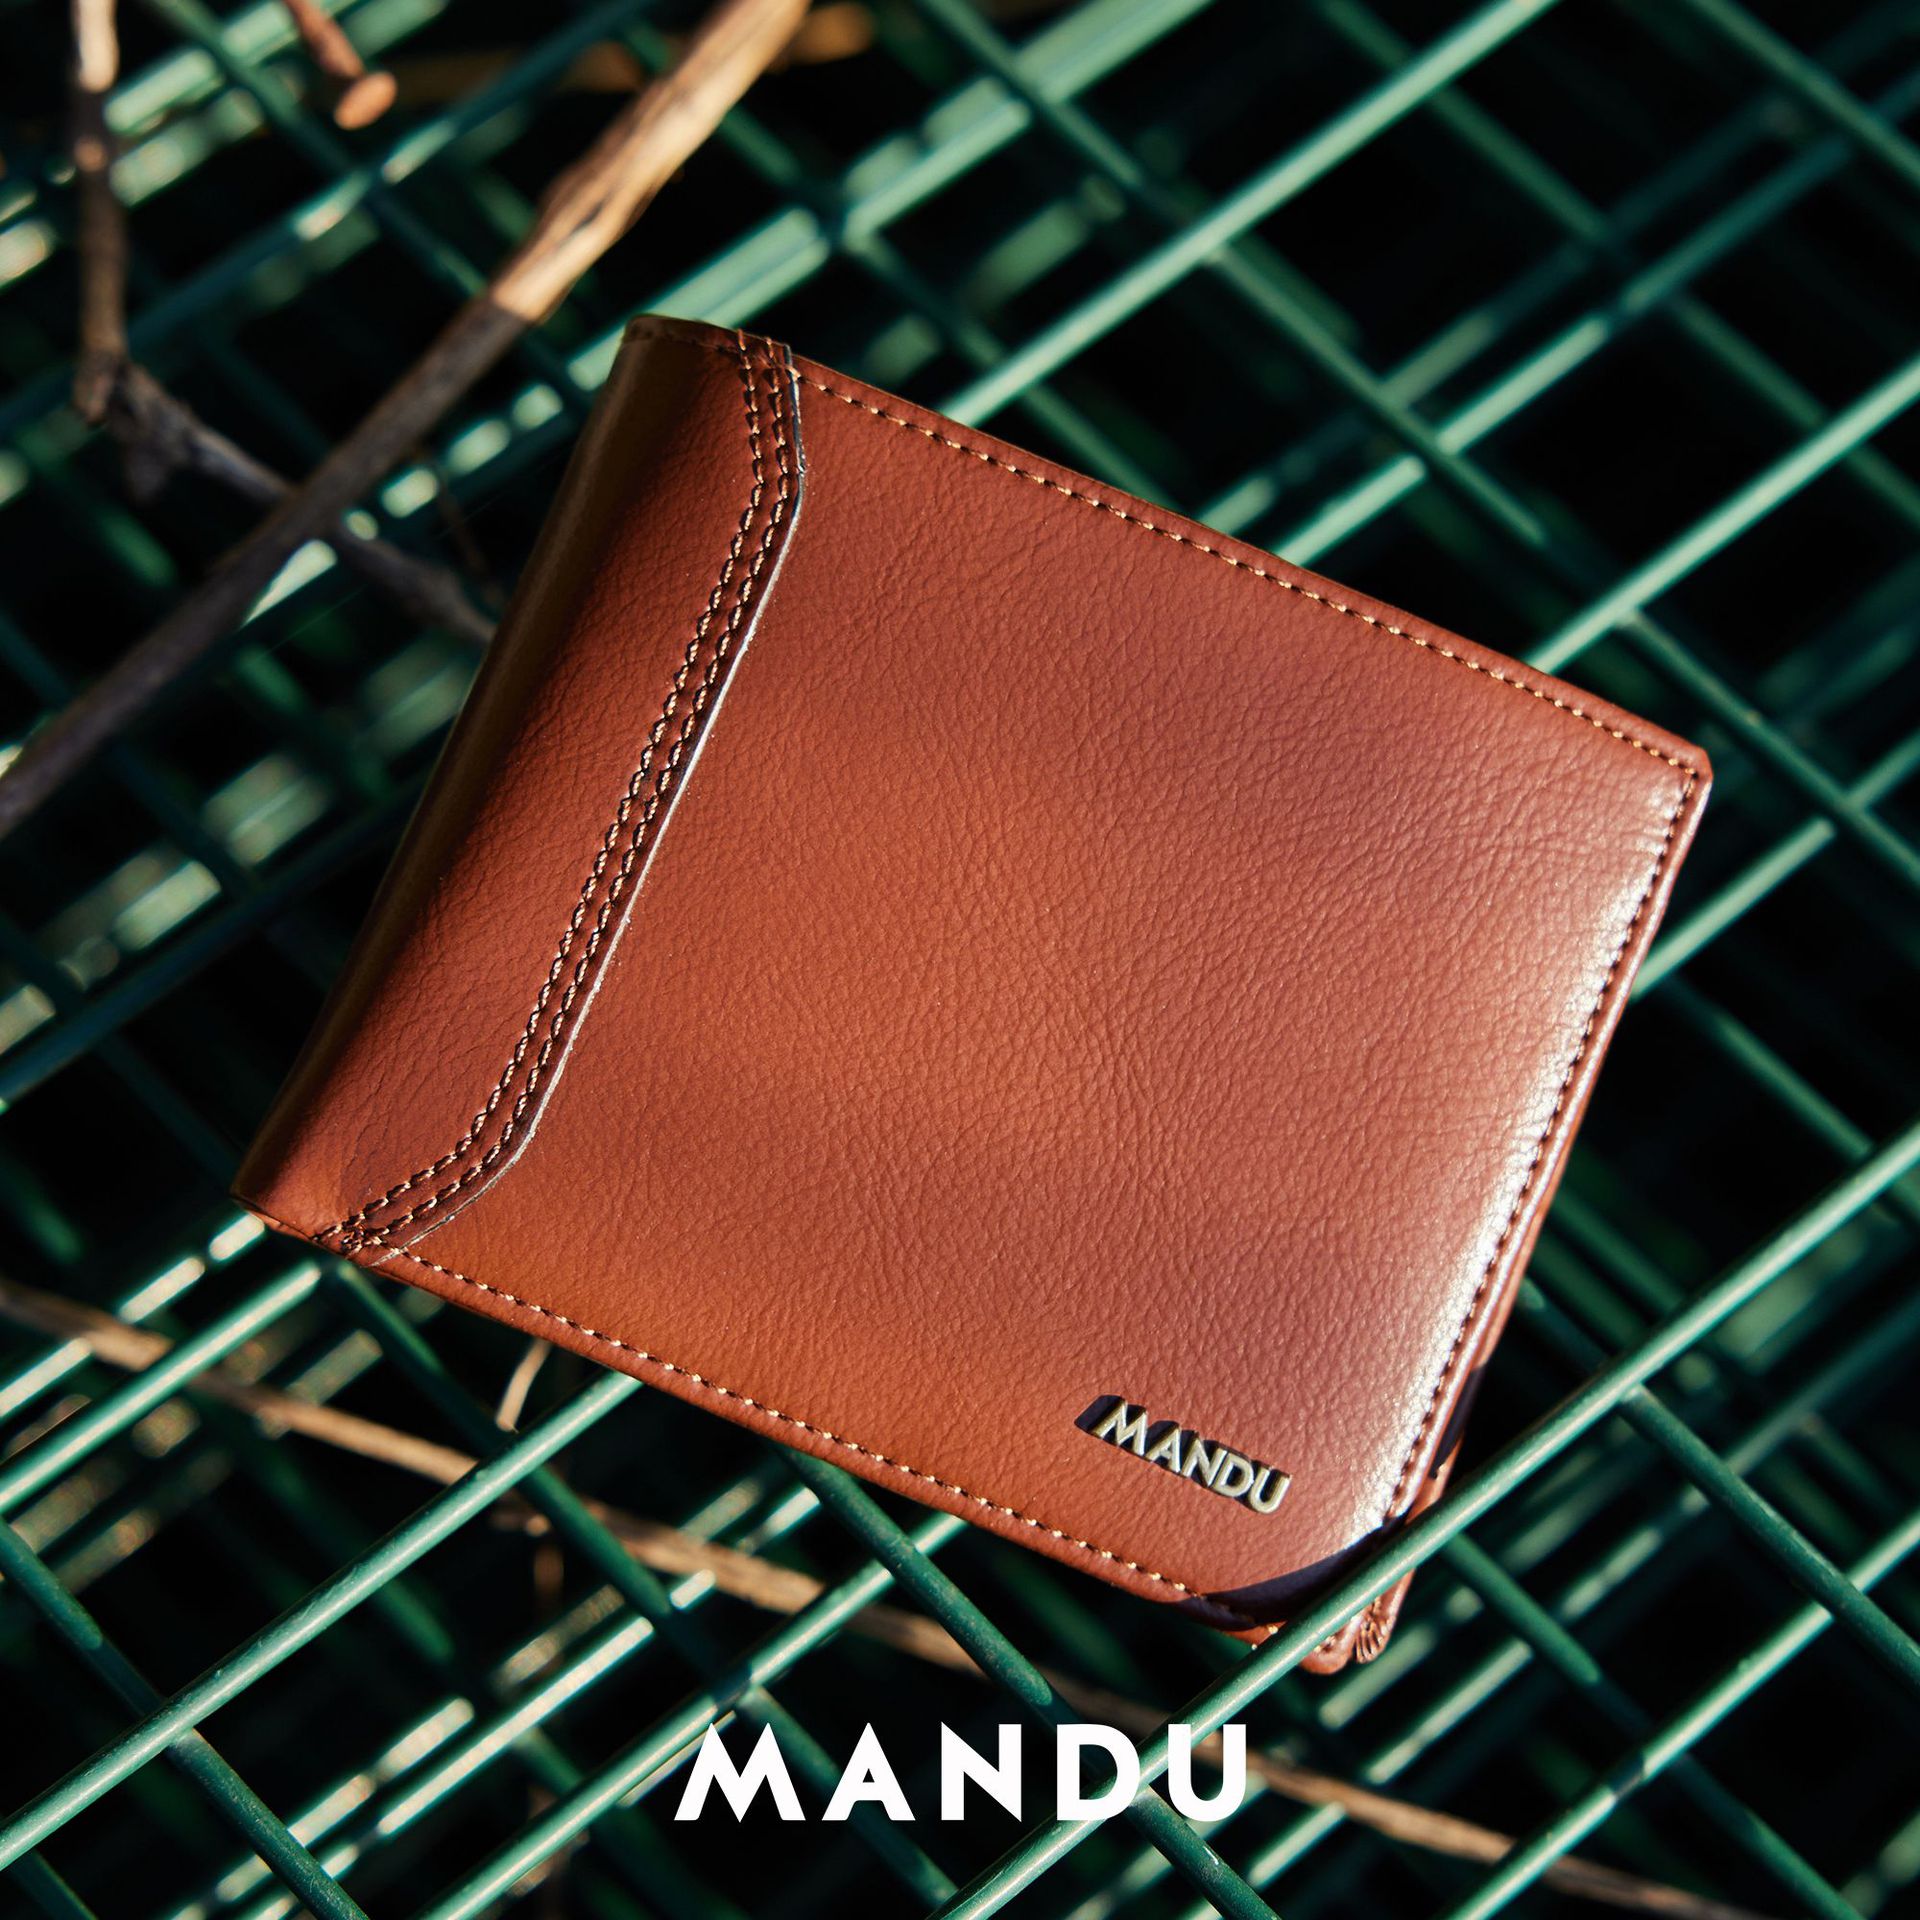 Mandu Branded Premium Quality Genuine Leather Wallet (RFID) with Branded Gift Box